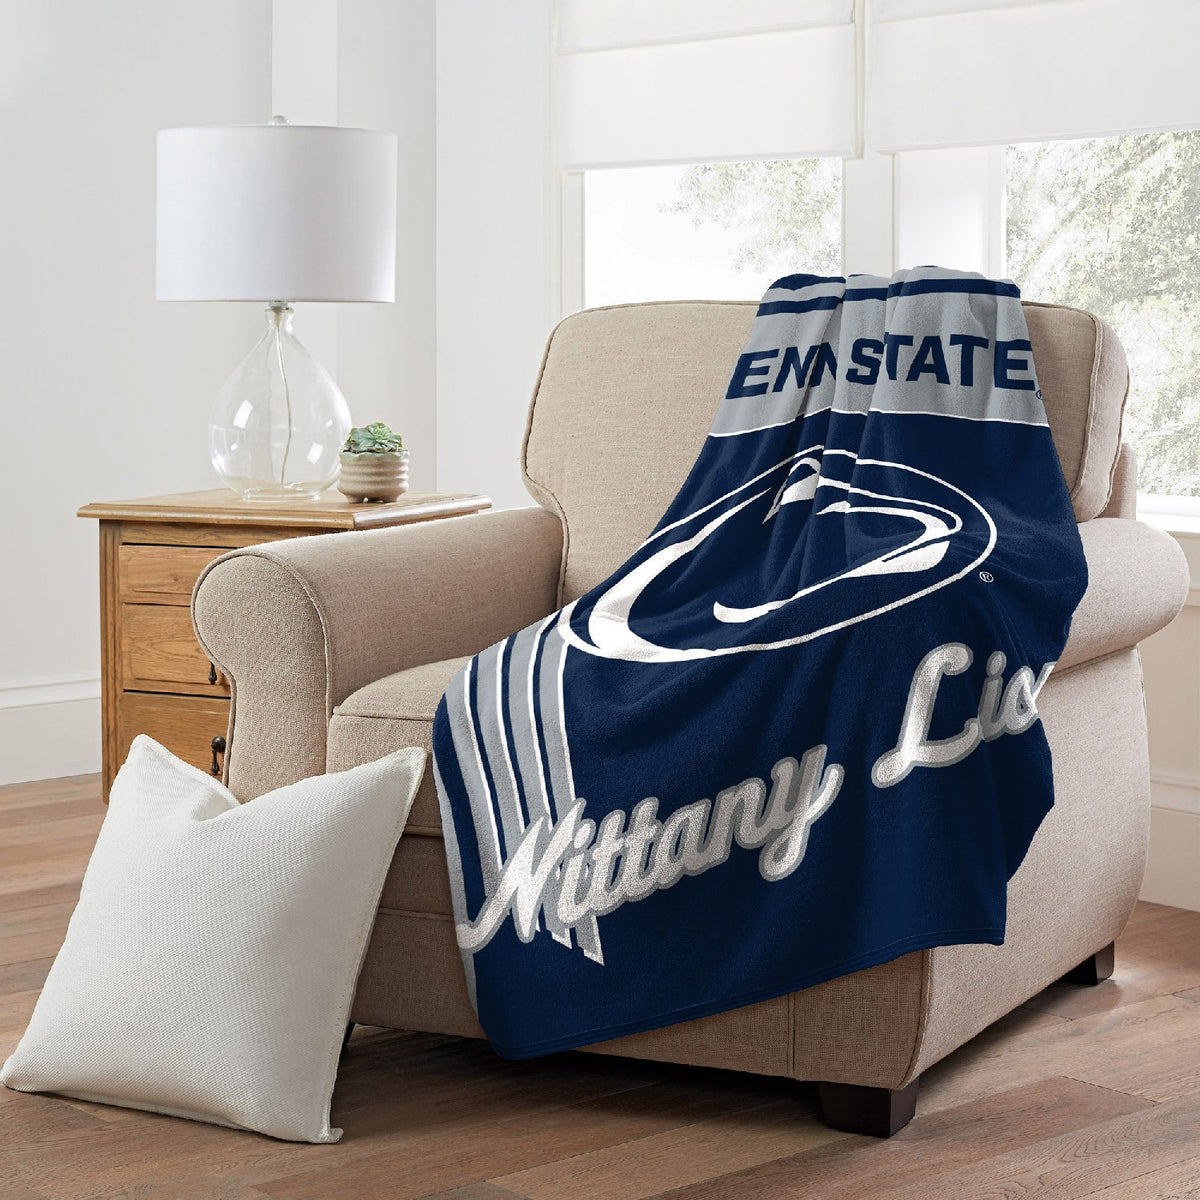 NCAA Throw Blanket Penn State Nittany Lions - Couch